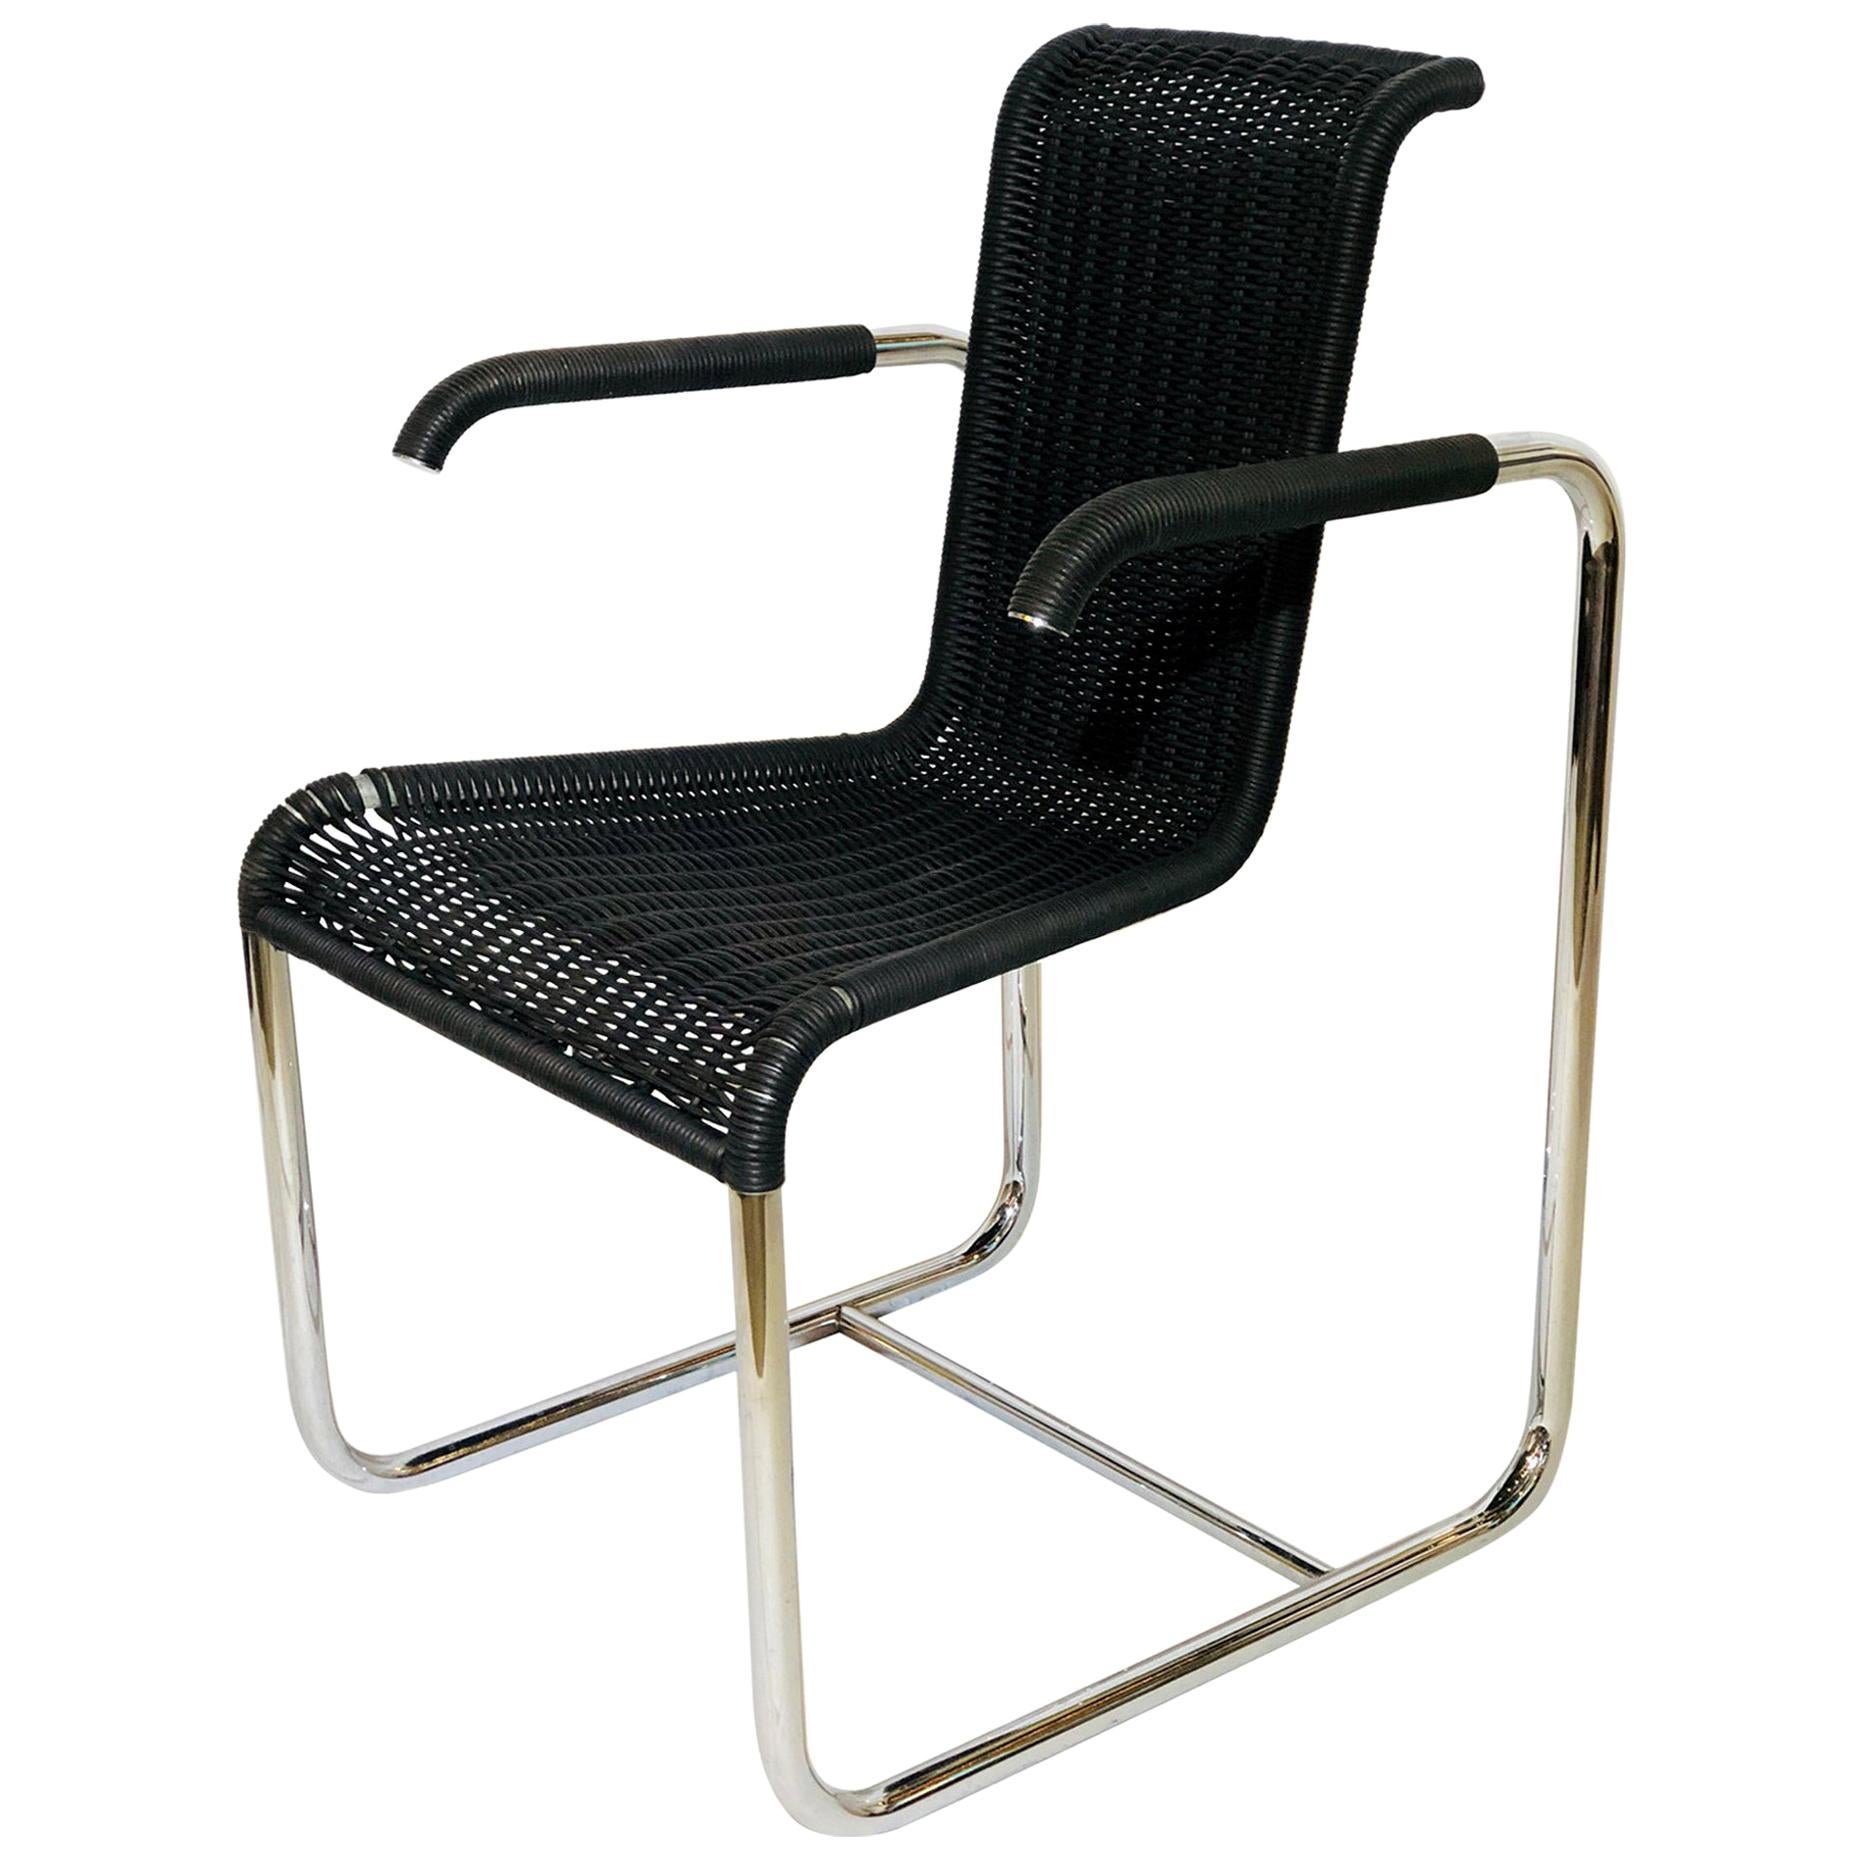 Jean Prouvé D20 Stainless Steel Leather Wicker Chairs for Tecta, Germany, 1980s For Sale